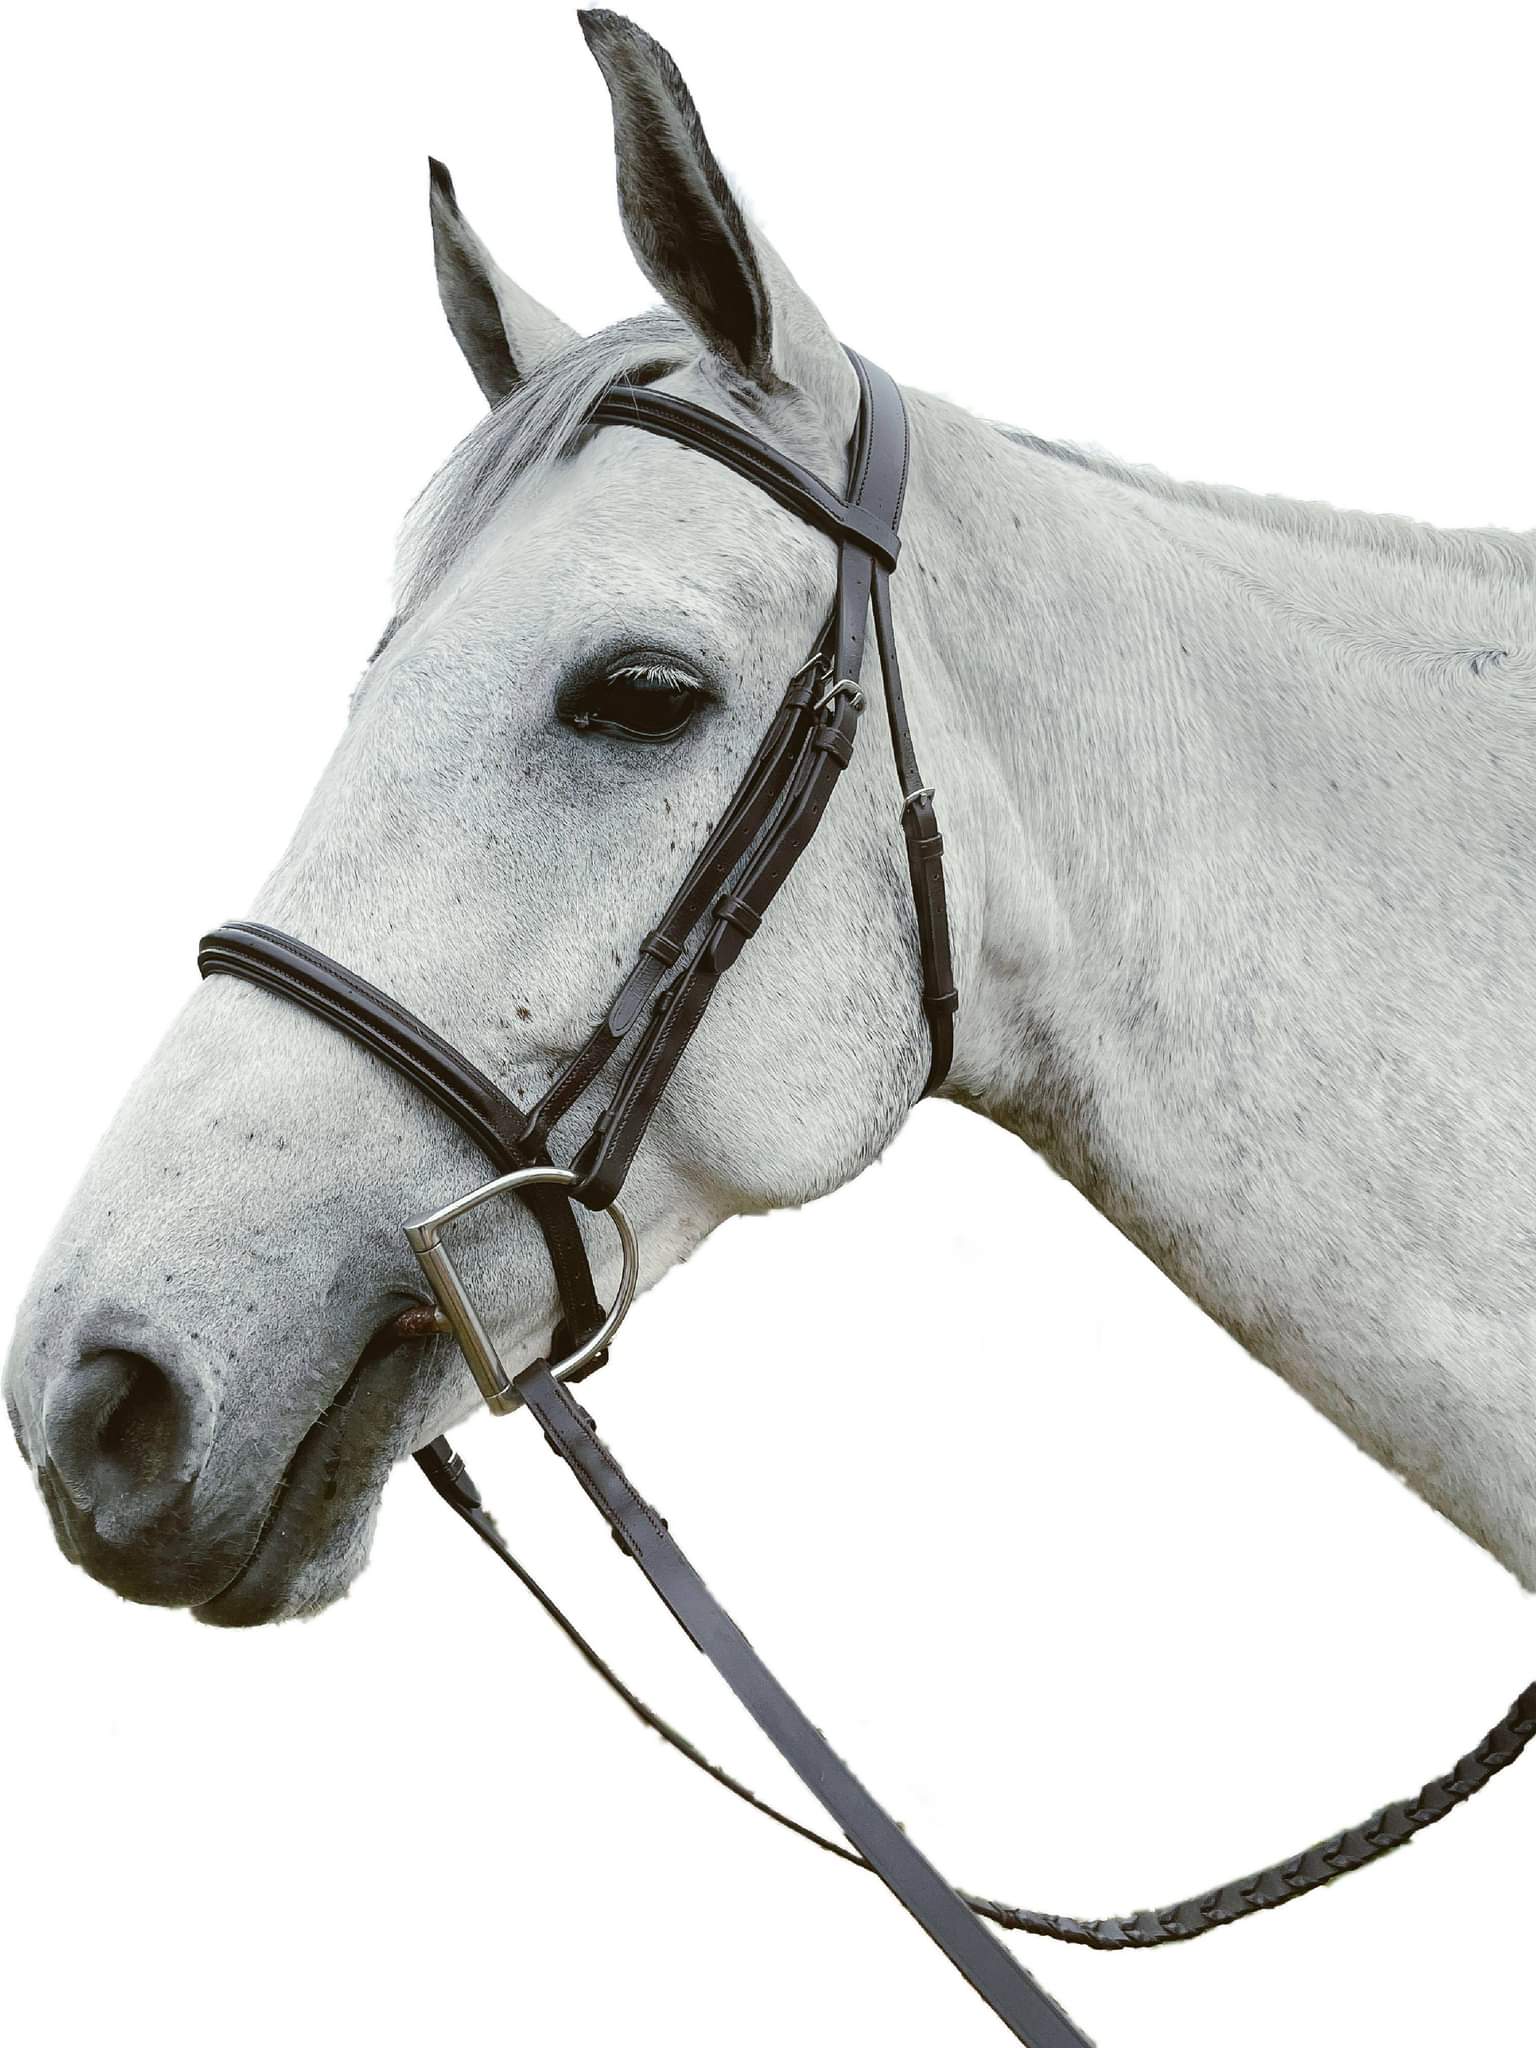 Exselle Event Plain Raised Padded Bridle and Laced Reins without Flash